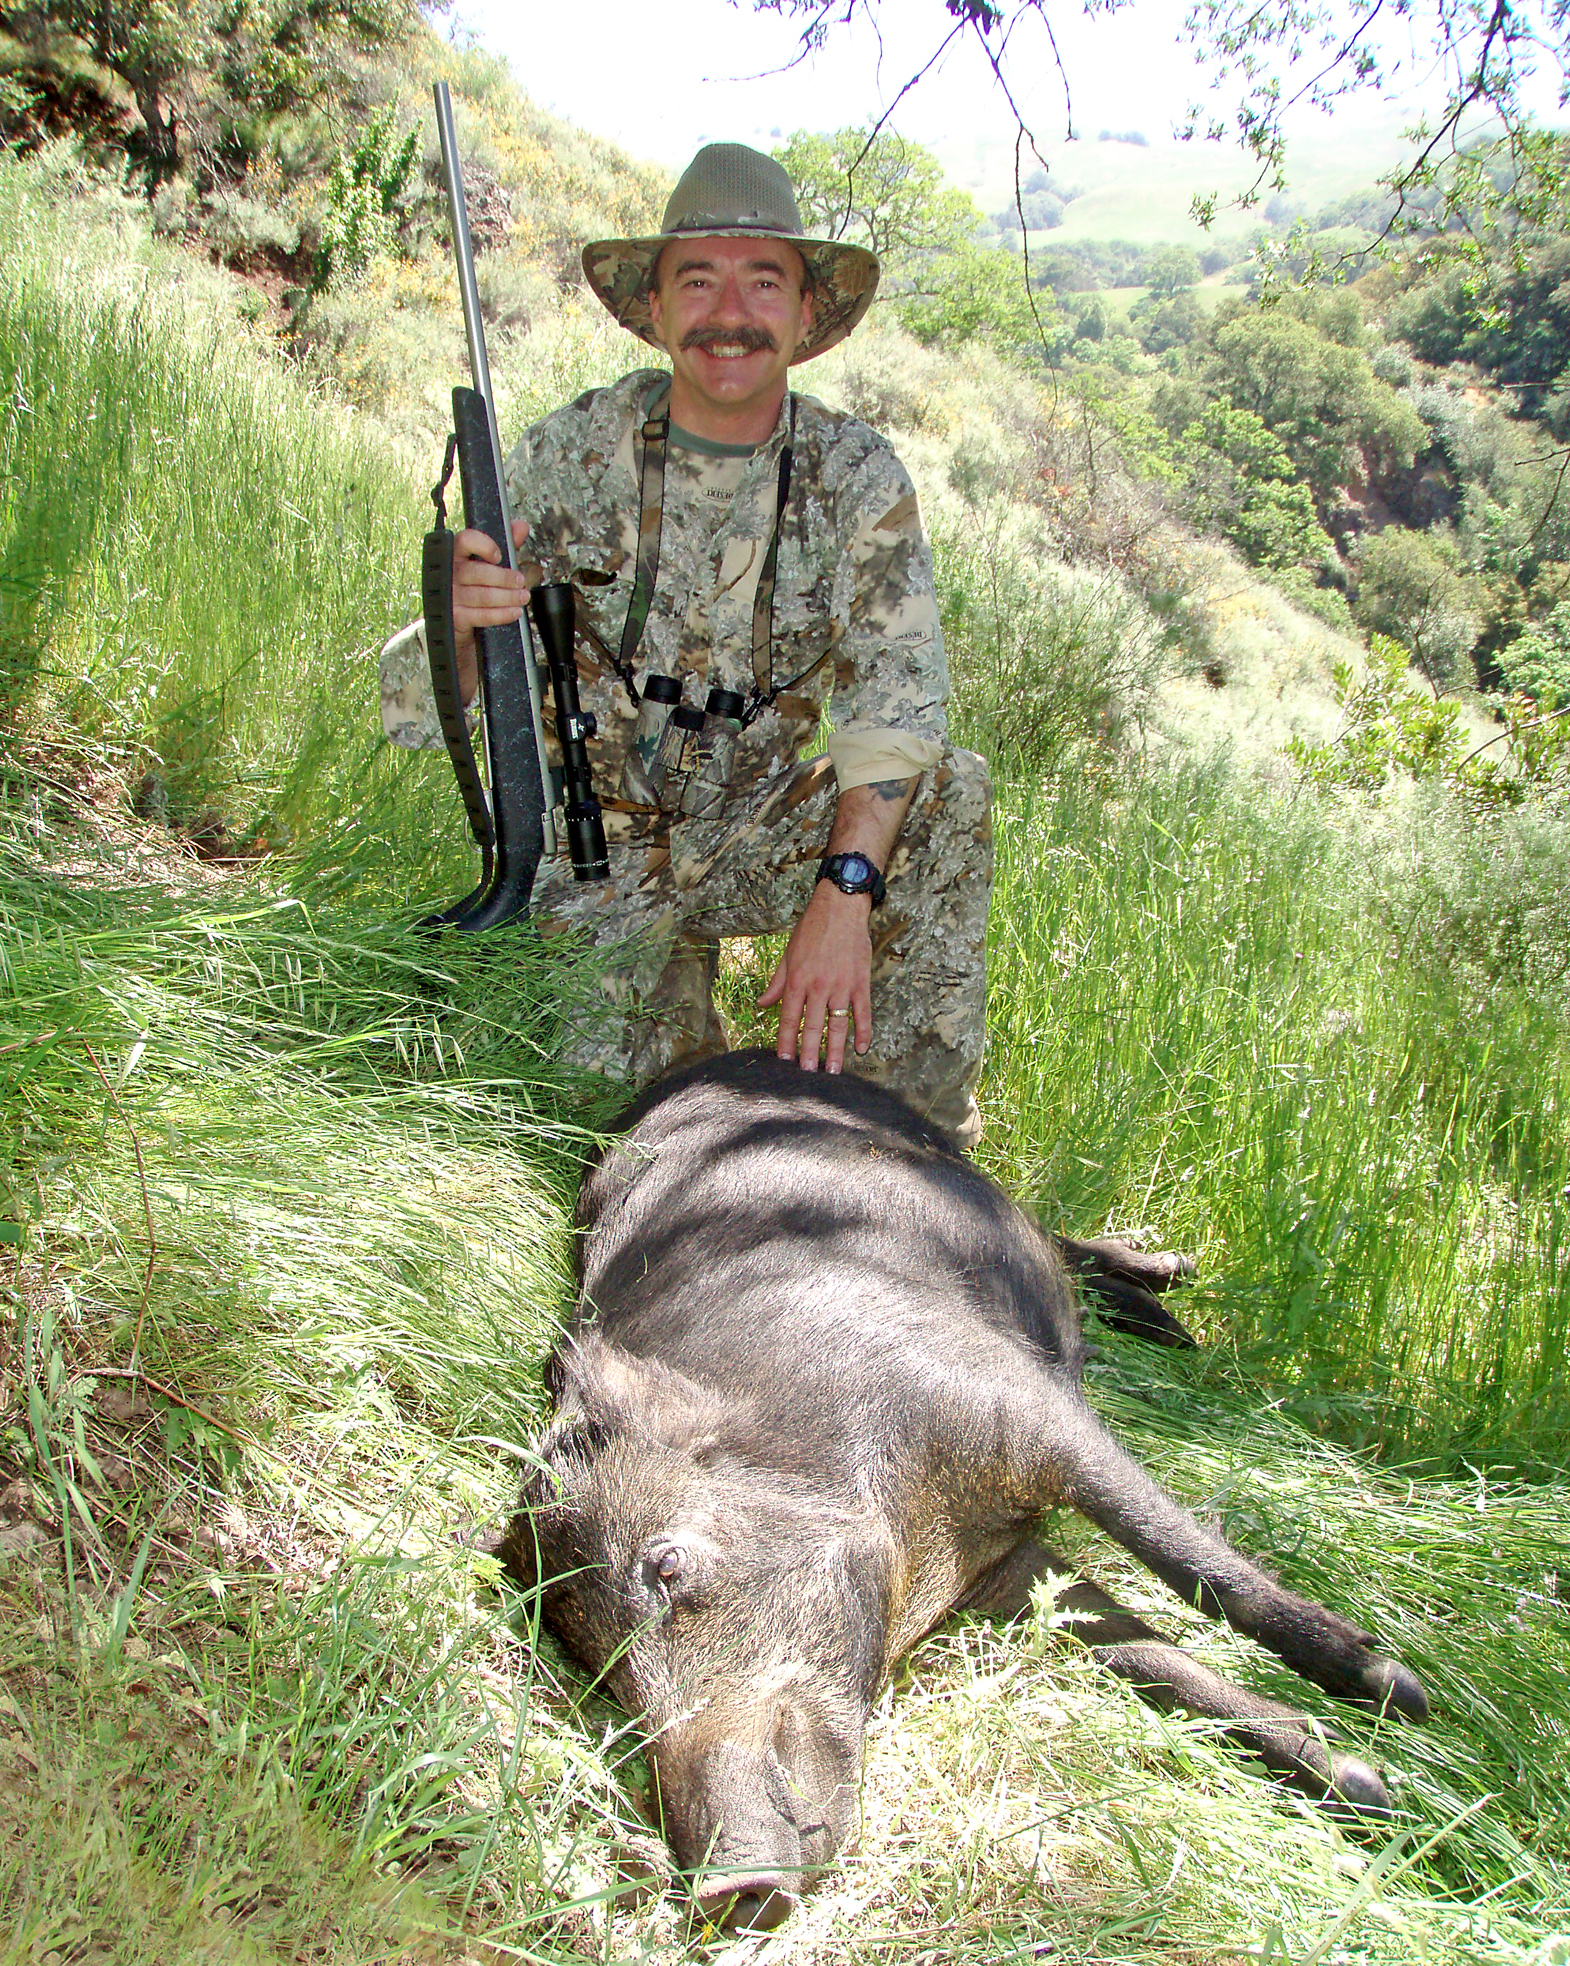 The author has hunted wild hogs for decades with a wide variety of different rifles.